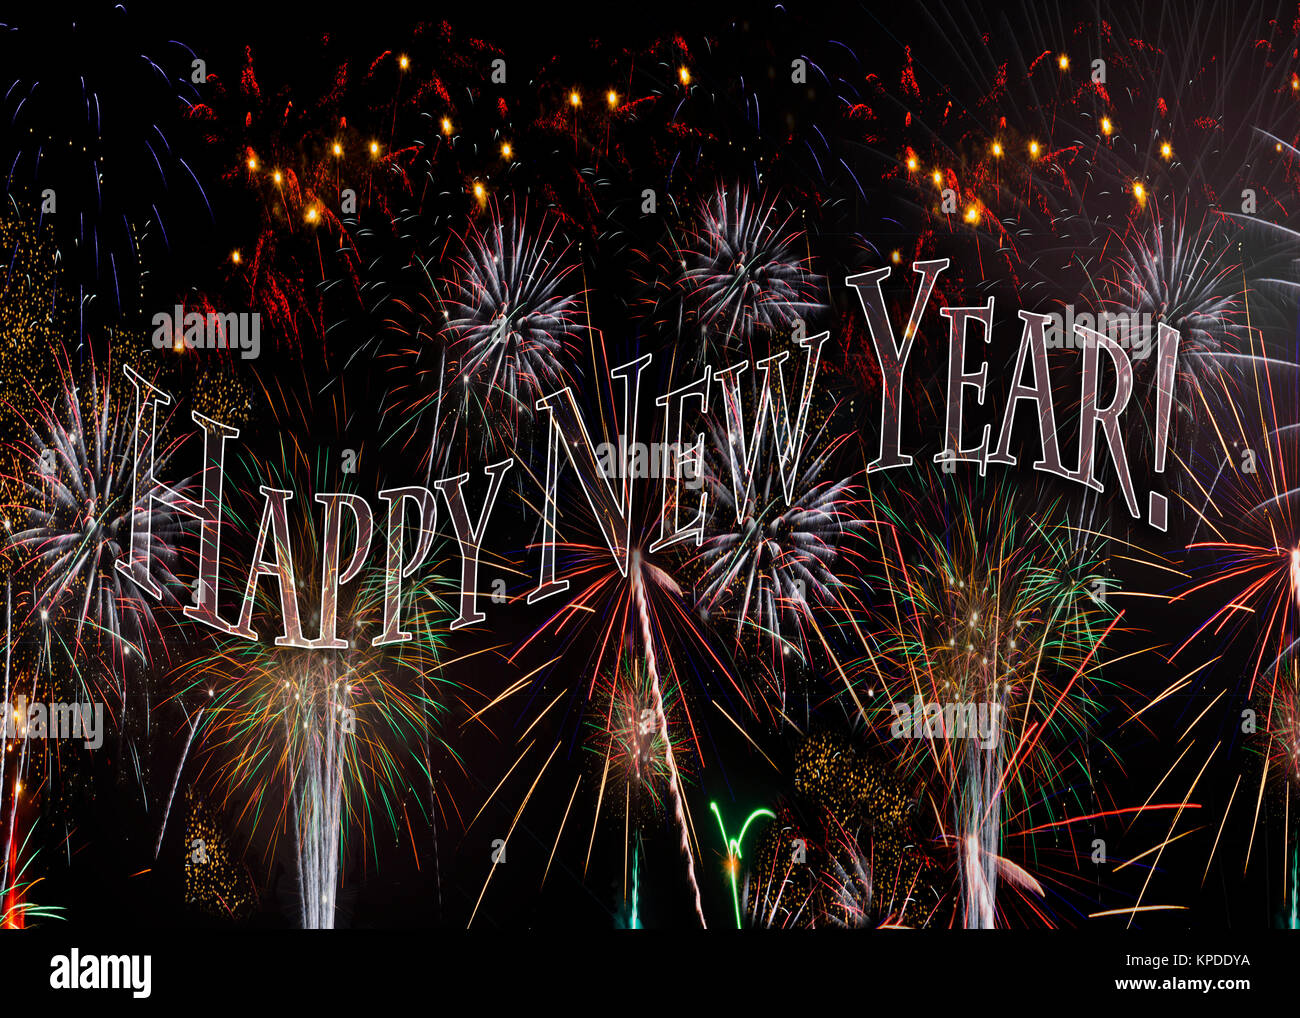 Fireworks 2018 New Years Eve concept transparent words spell out Happy New Year Also available with the year behind see KPDDY9 Stock Photo